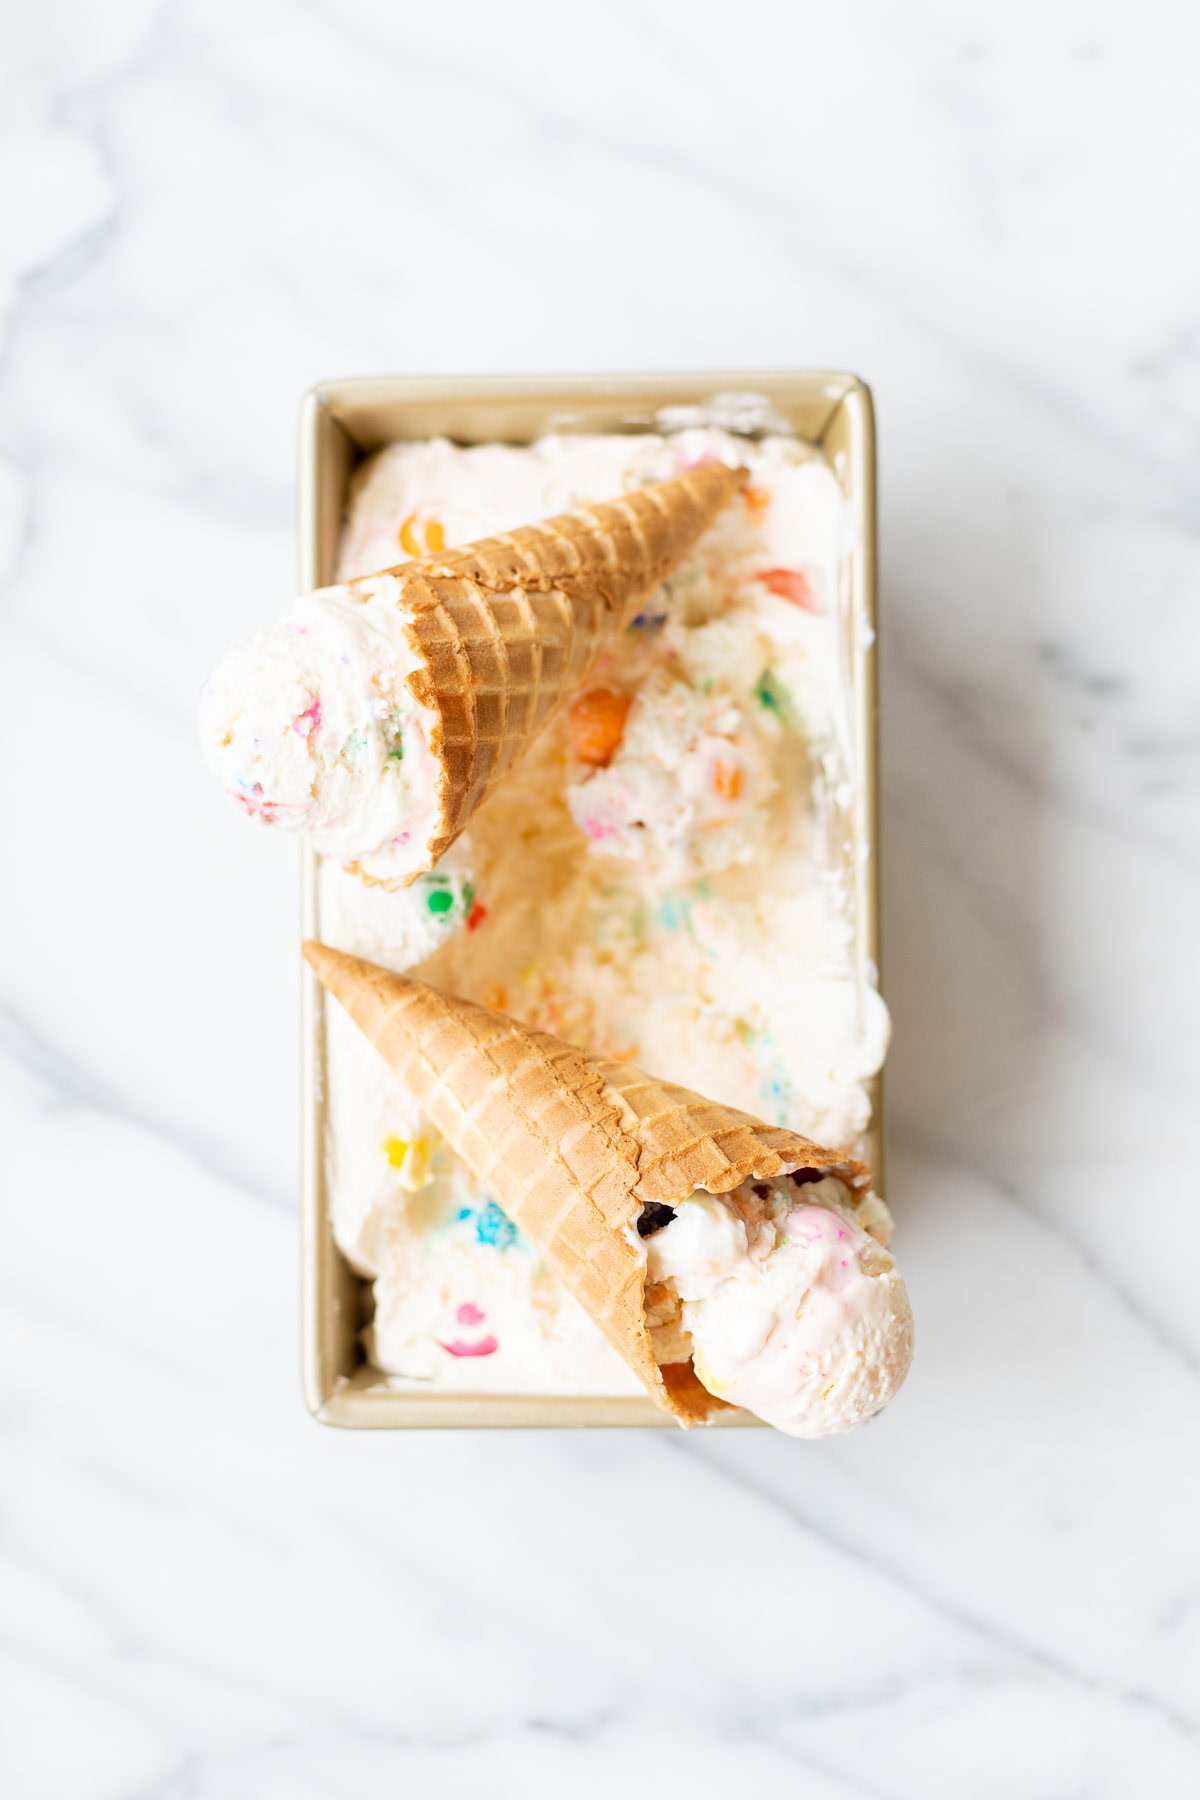 Two waffle cones filled with colorful, sprinkled bubble gum ice cream are placed on top of a rectangular container filled with the same ice cream, sitting on a white marble surface.